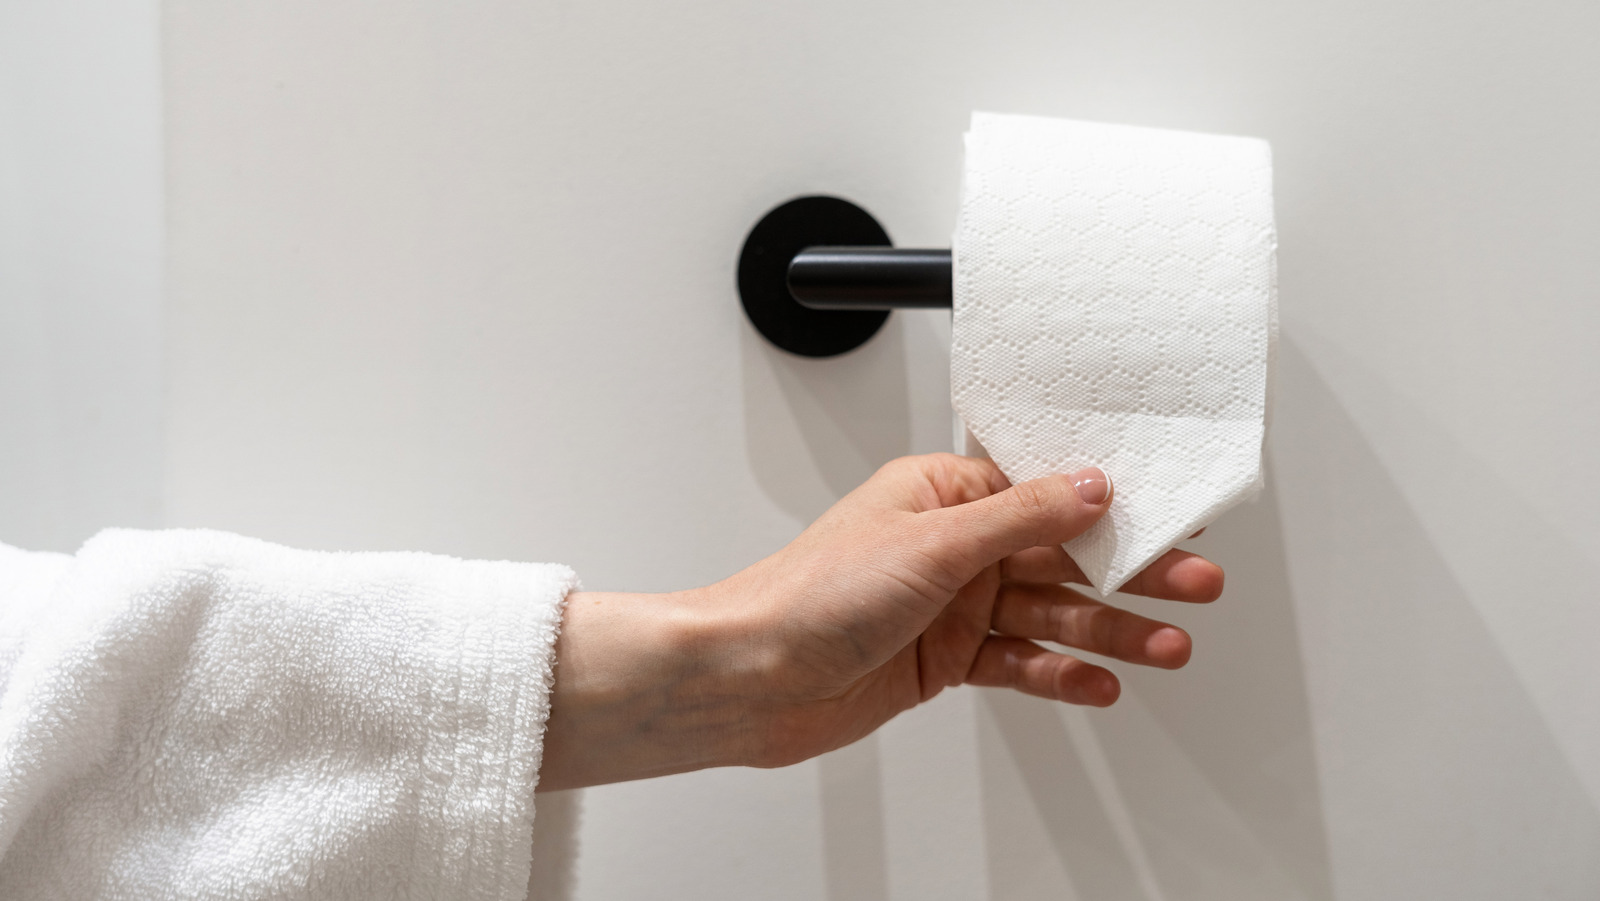 https://www.housedigest.com/img/gallery/how-to-stamp-your-toilet-paper-roll-for-a-fancy-hotel-finish/l-intro-1688147604.jpg